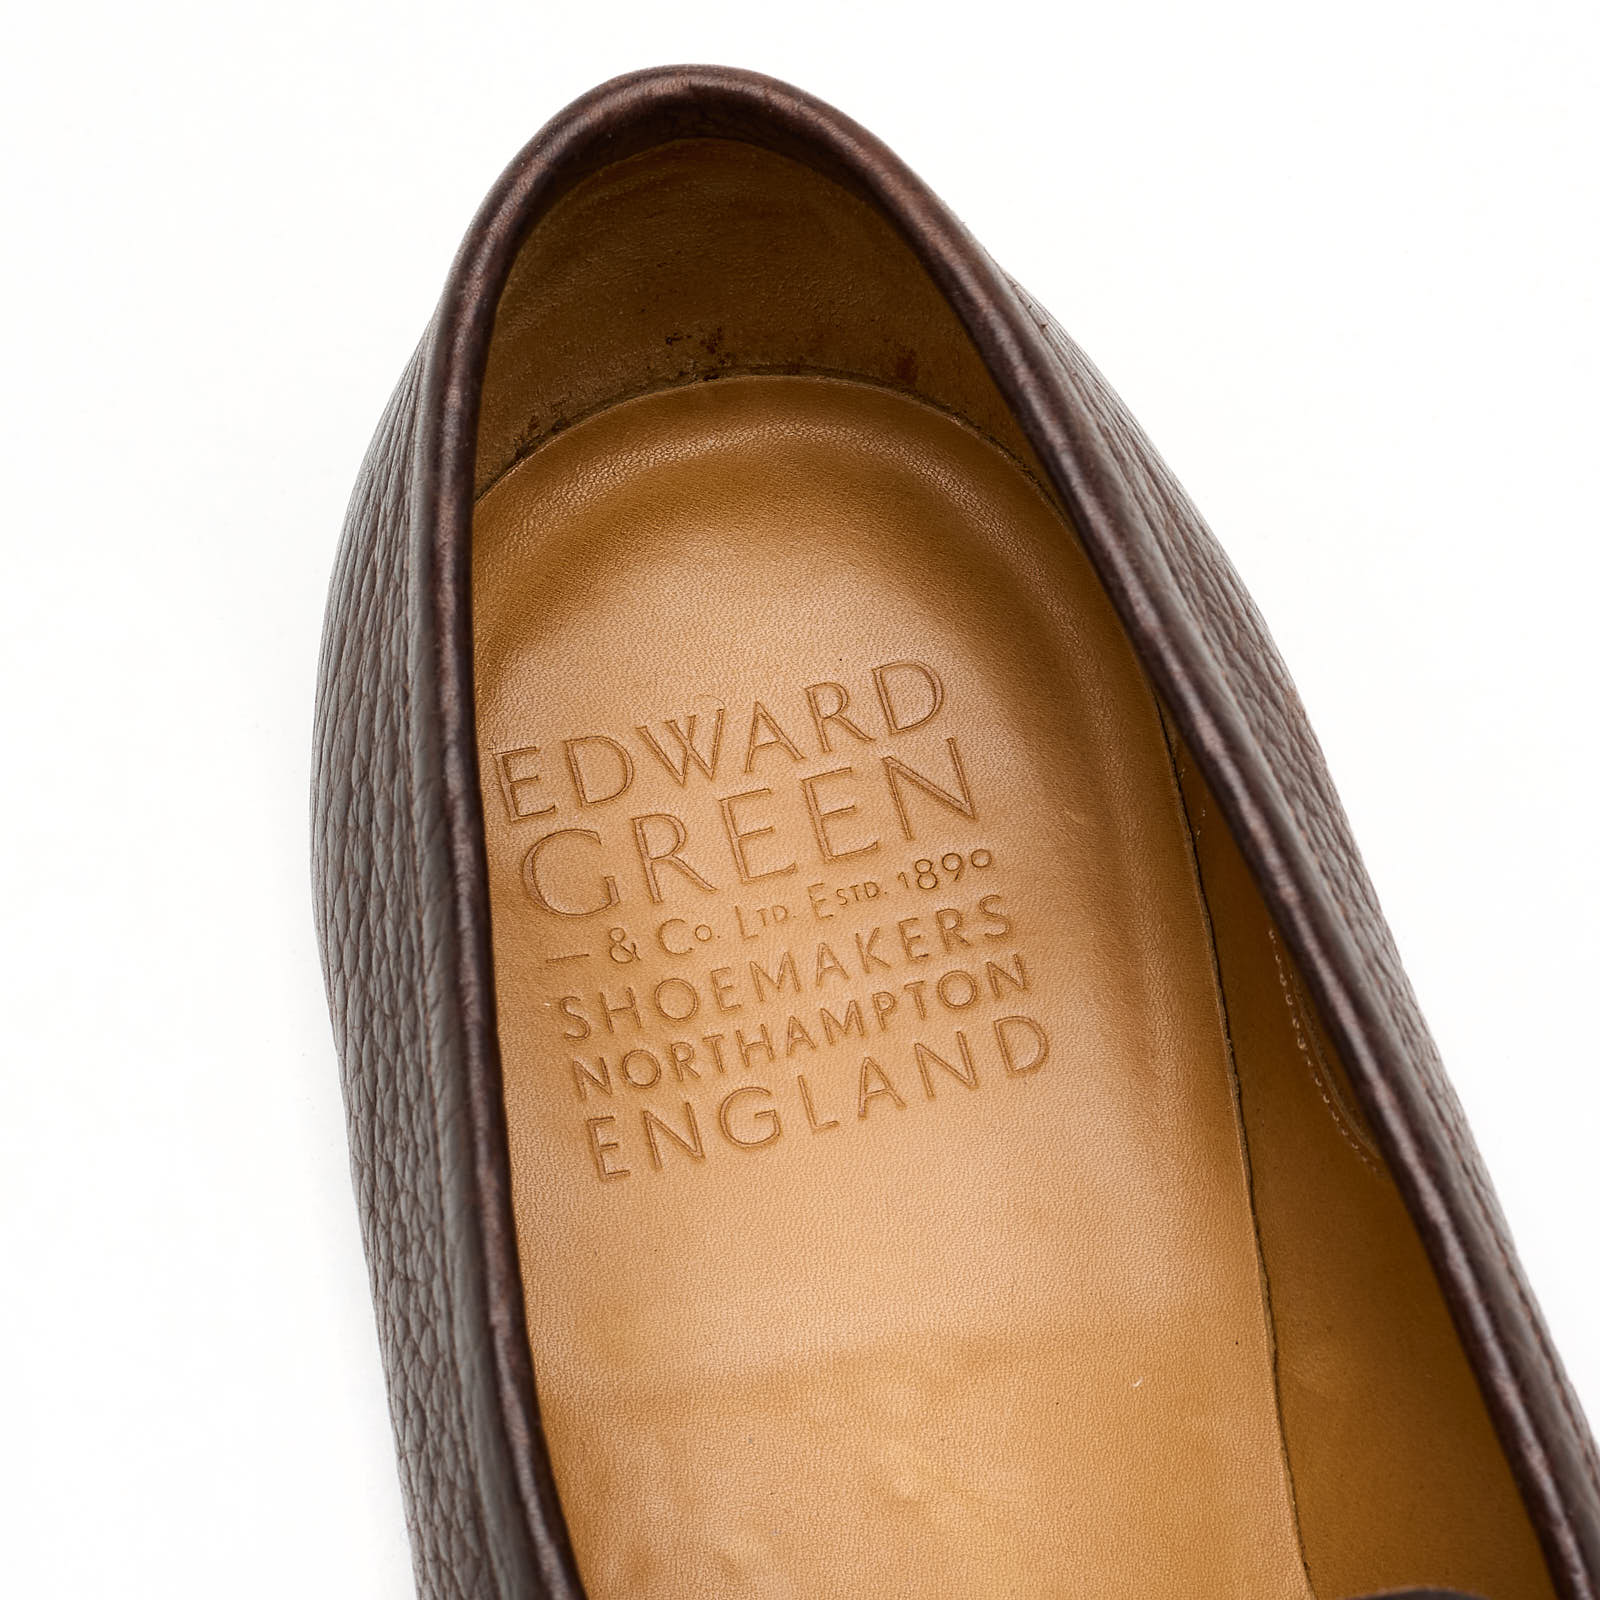 EDWARD GREEN Piccadilly London Grain Calf Penny Loafer UK 8.5 US 9 Last 184